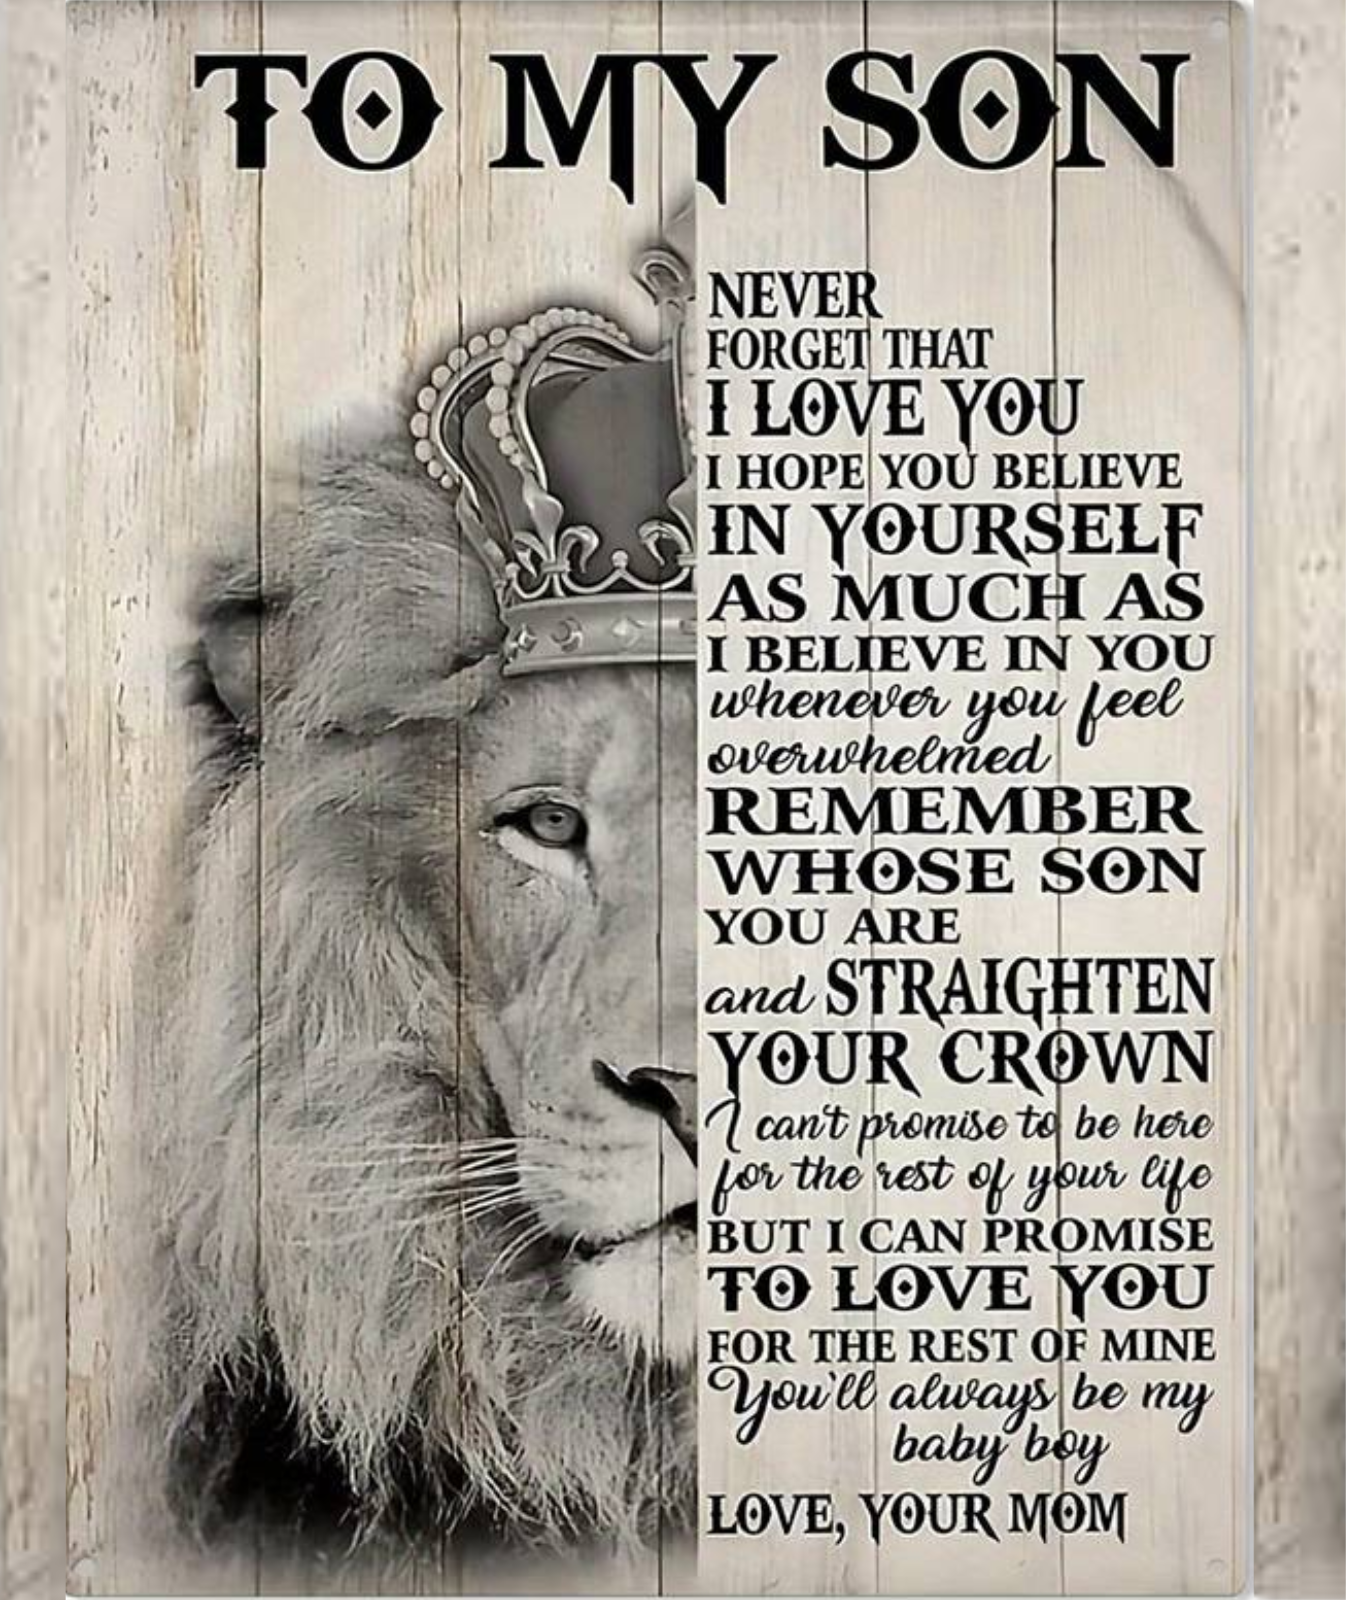 To My Son Never Forget King-MOM -Premium Mink Sherpa Blanket 50x60 SALE price $49.95 USD